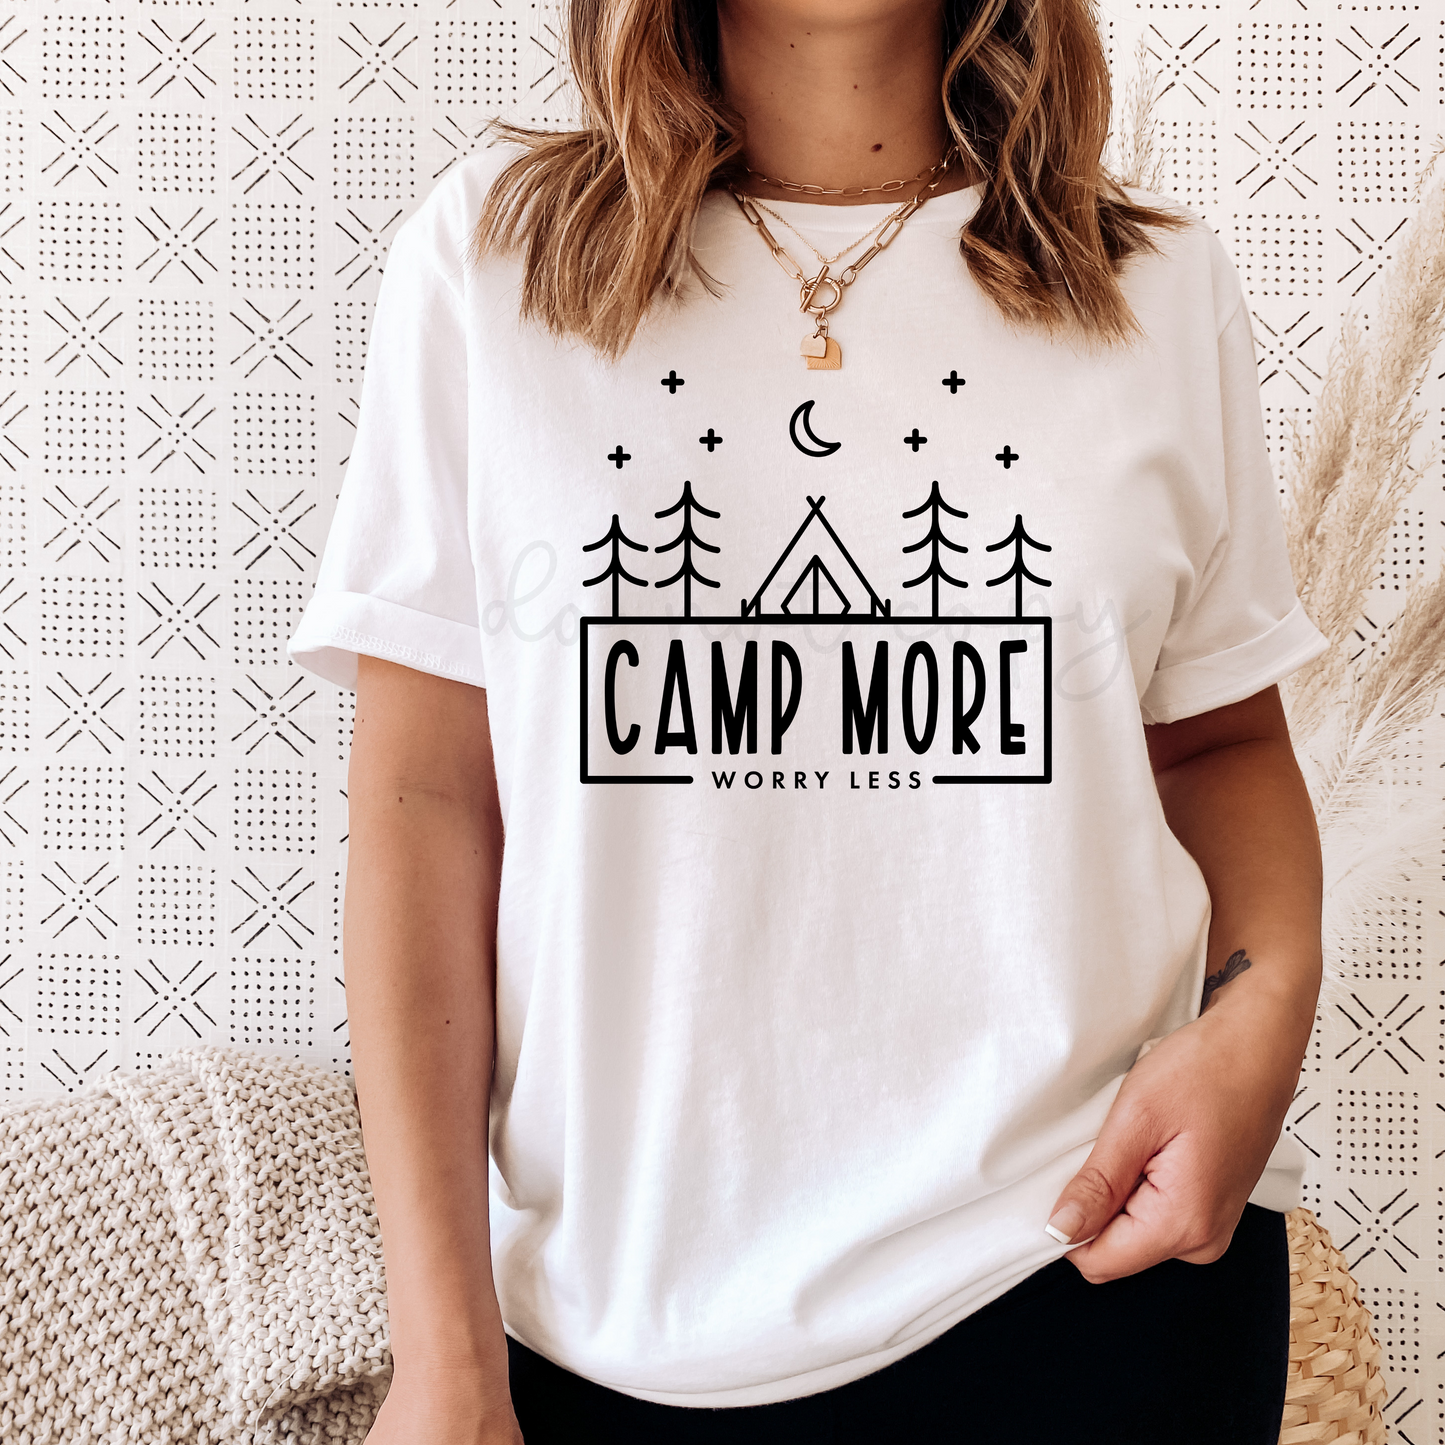 Camp More worry less